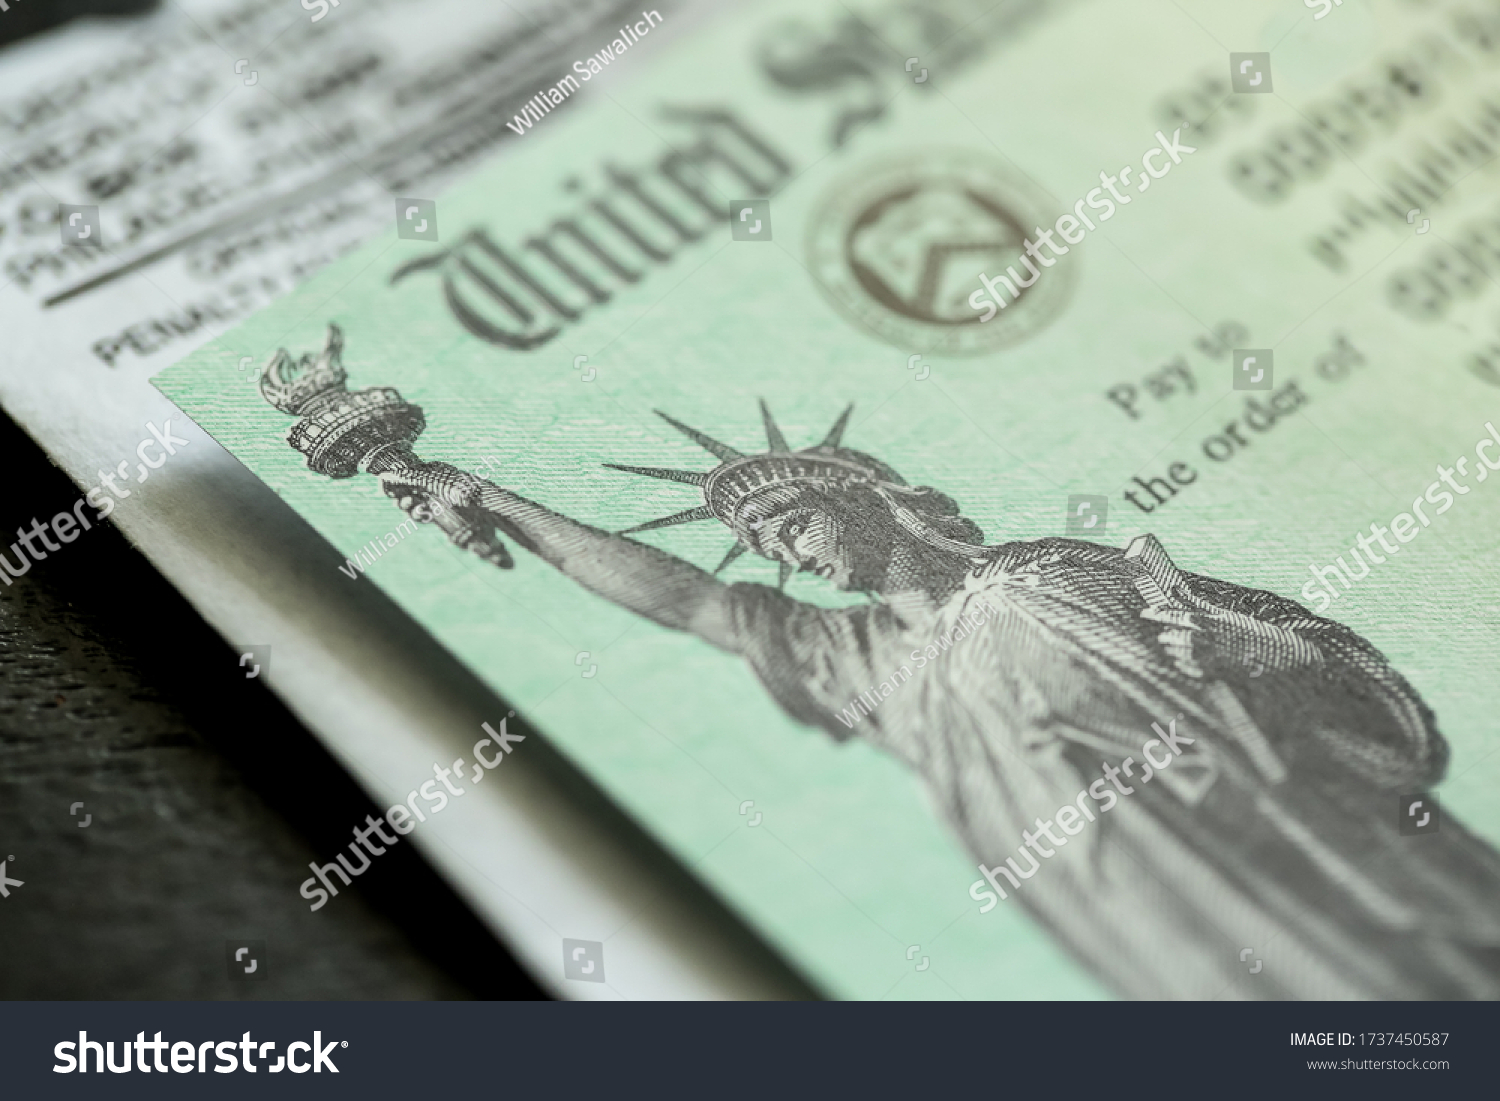 Extreme close-up of Federal coronavirus stimulus check provided to all Americans from the United States Treasury in 2020 and 2021, showing the statue of liberty.  #1737450587